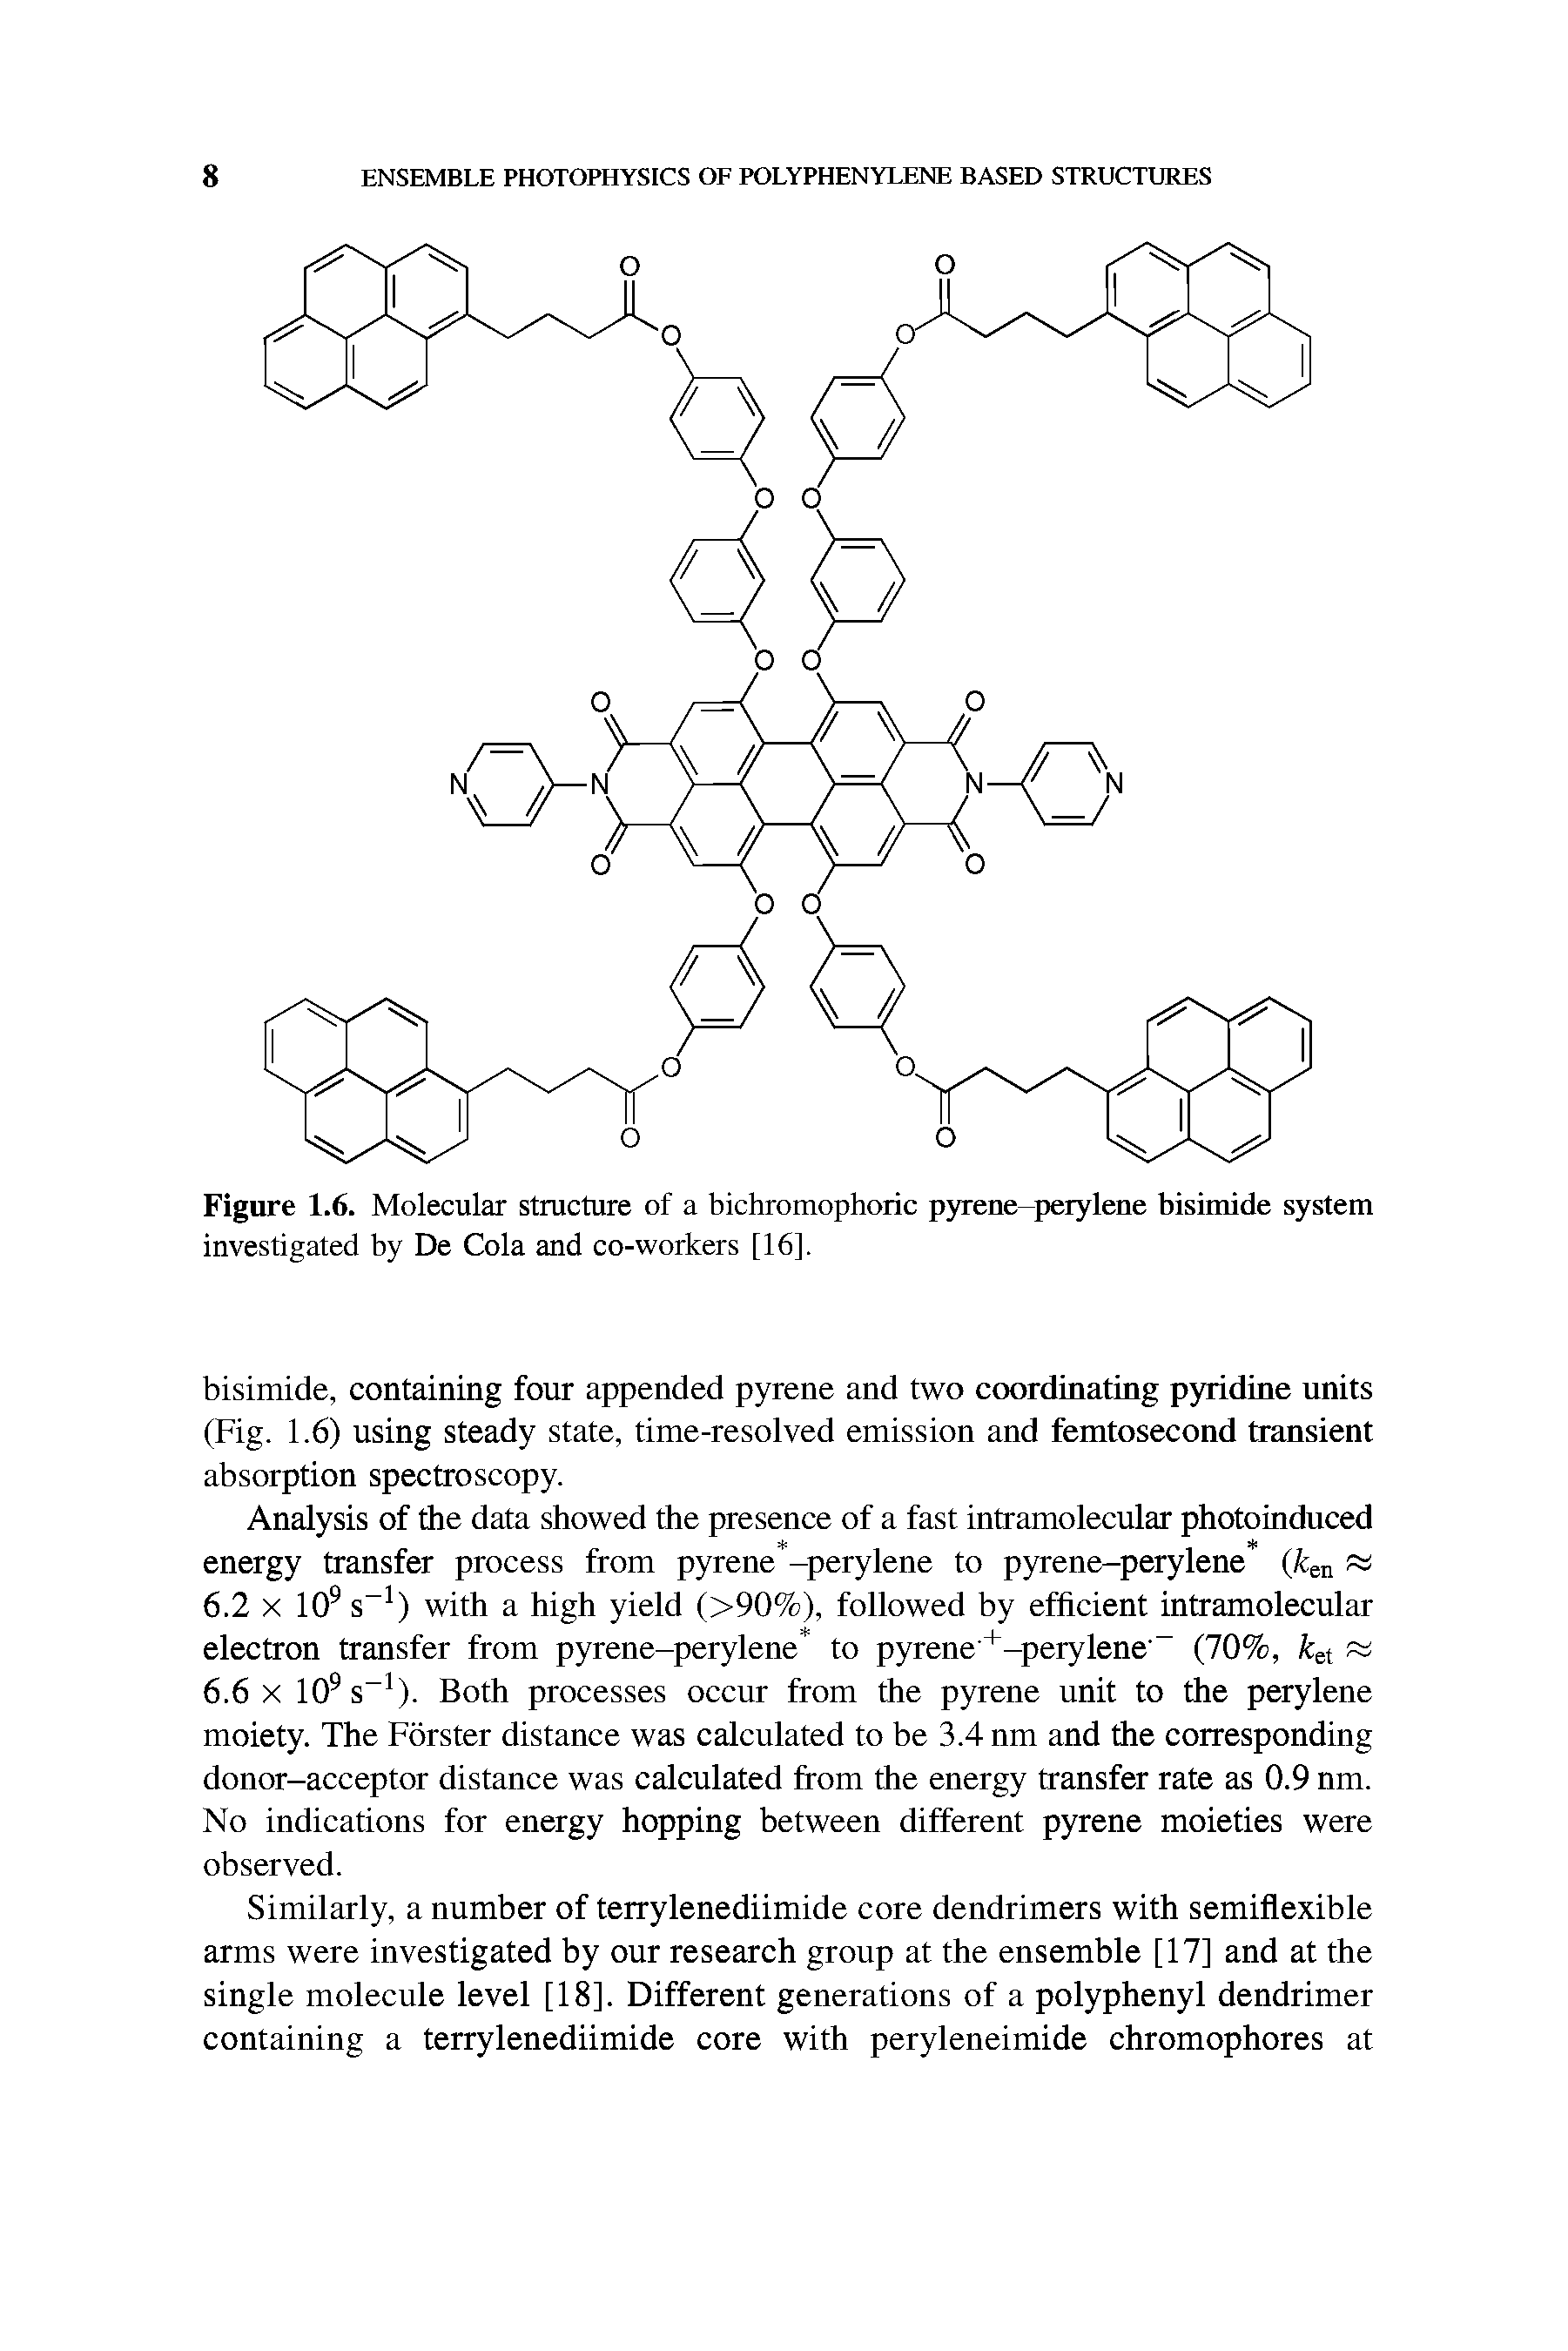 Figure 1.6. Molecular structure of a bichromophoric pyrene-perylene bisimide system investigated by De Cola and co-workers [16].